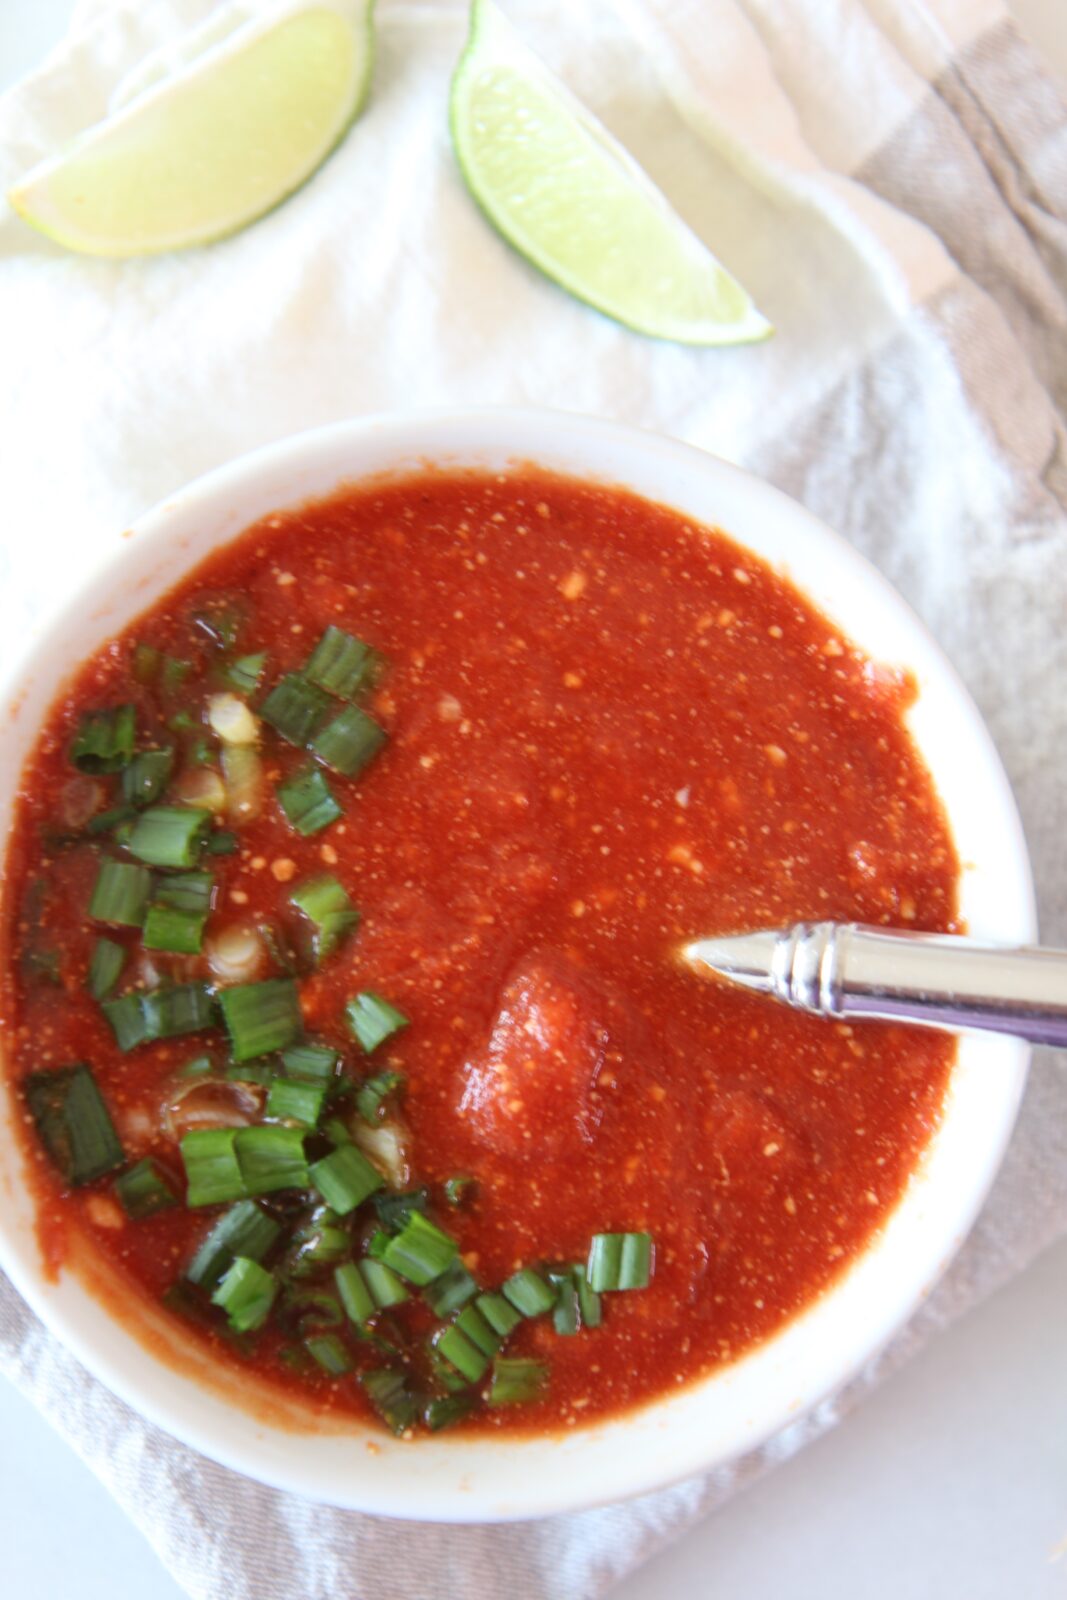 Slow Cooker Thai Tomato Soup Recipe. Super easy warm bowl of dinner smiles. This is as easy as throw all the ingredients in the slow cooker and come home to an amazing meal. #slowcooker #soup